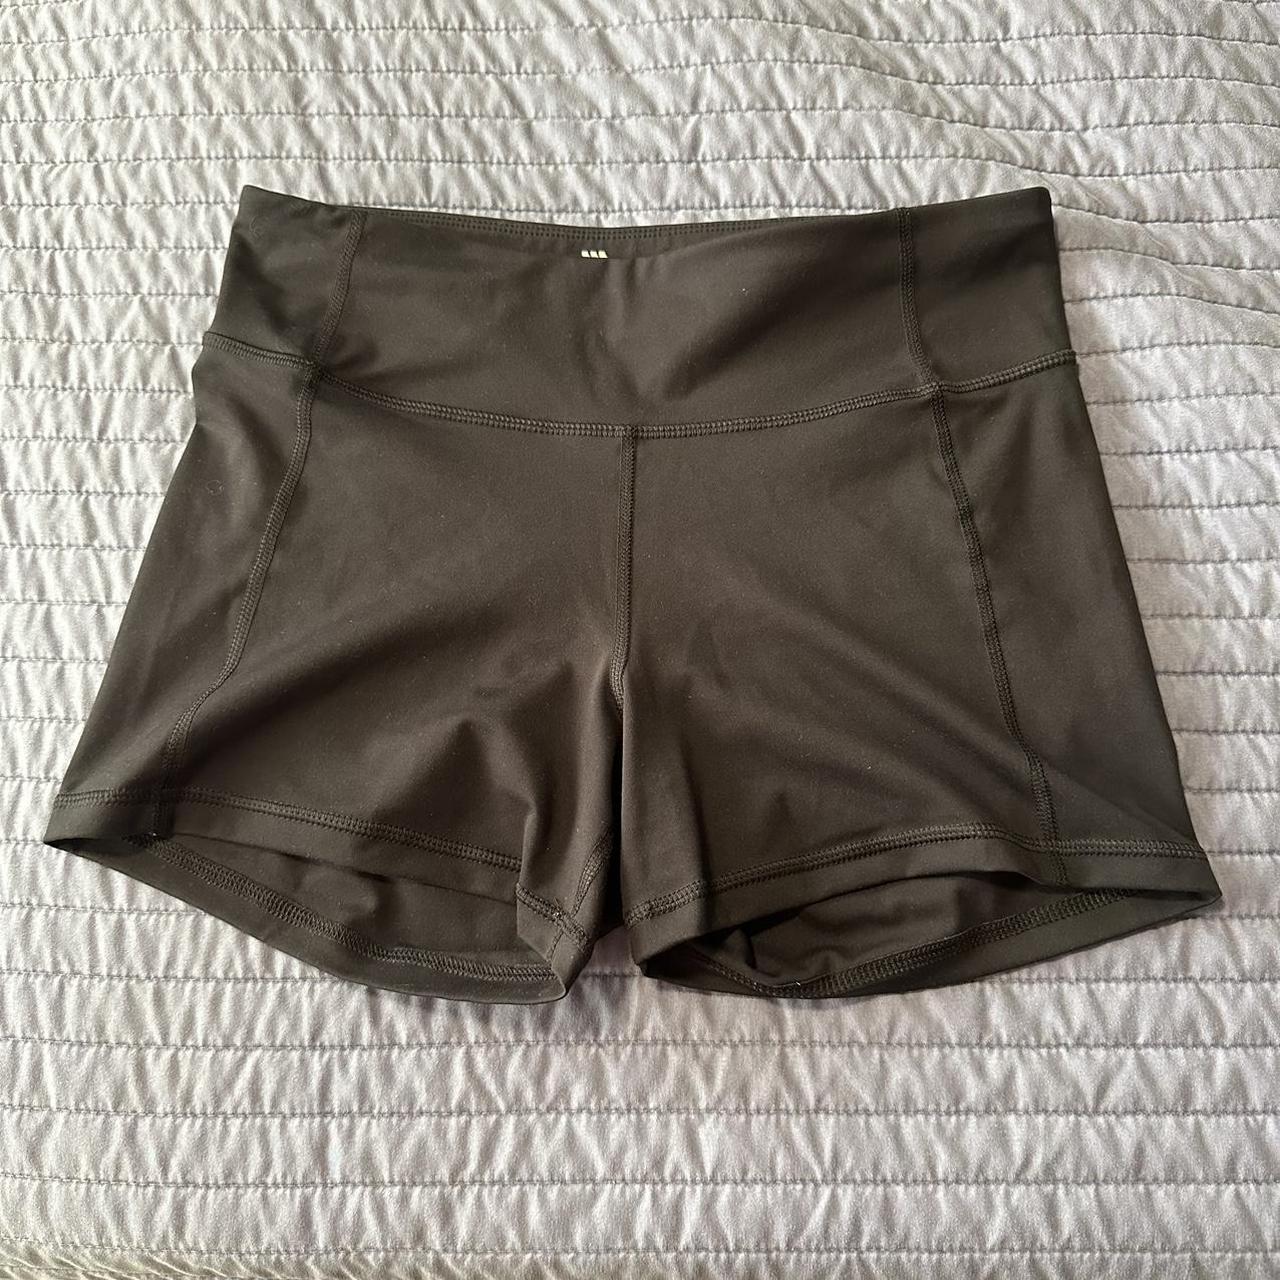 All in motion shorts from Target - Depop